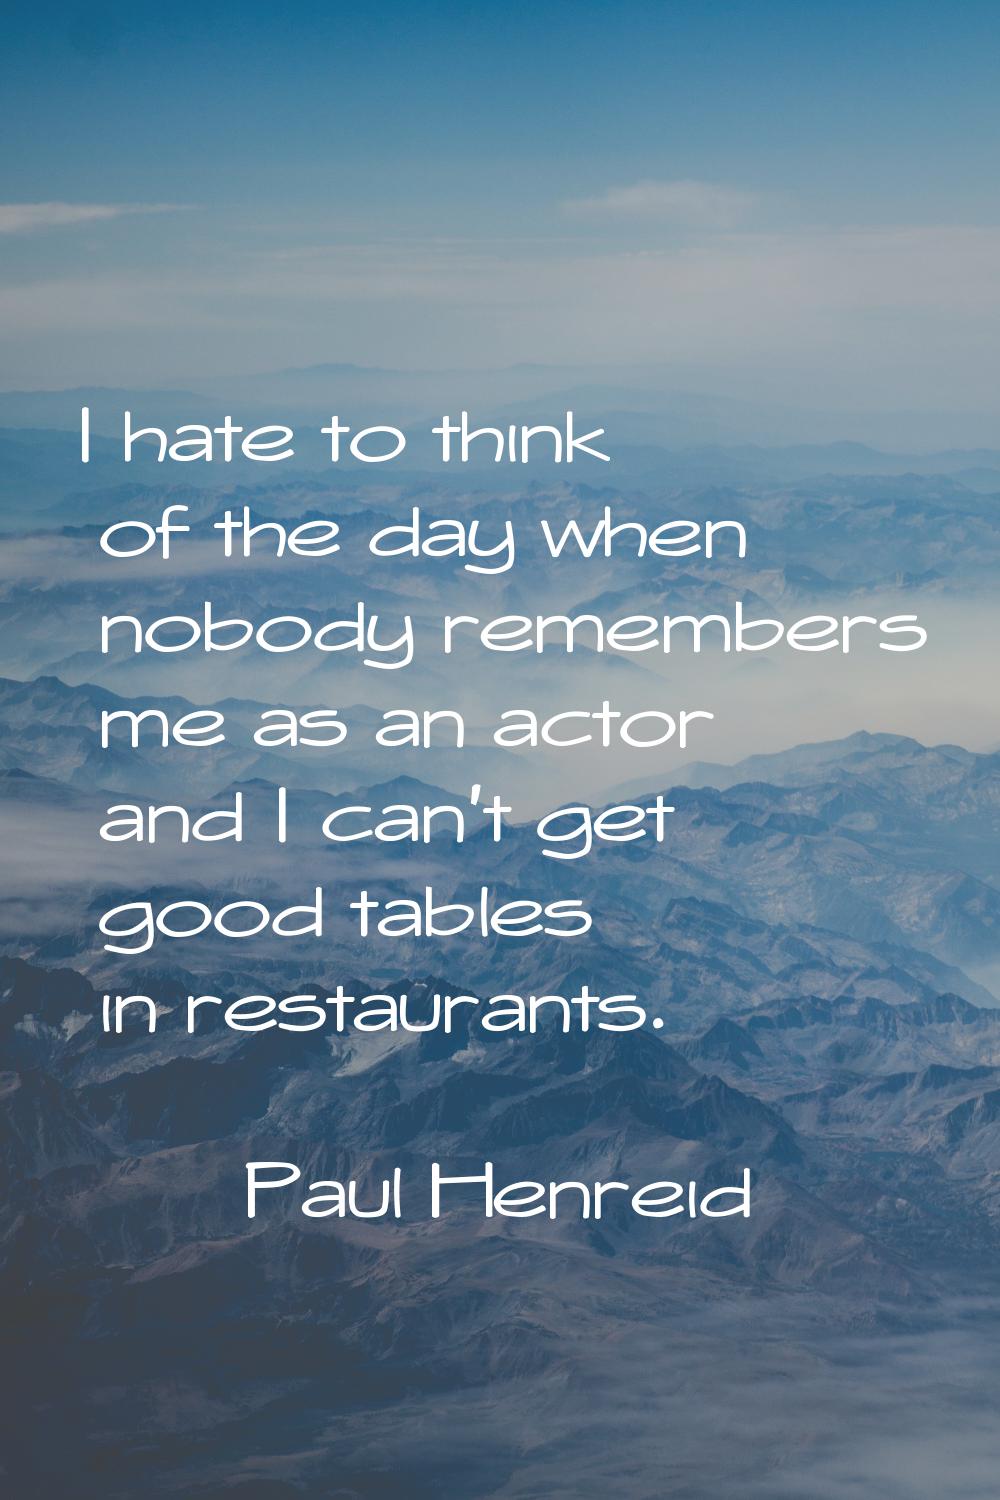 I hate to think of the day when nobody remembers me as an actor and I can't get good tables in rest